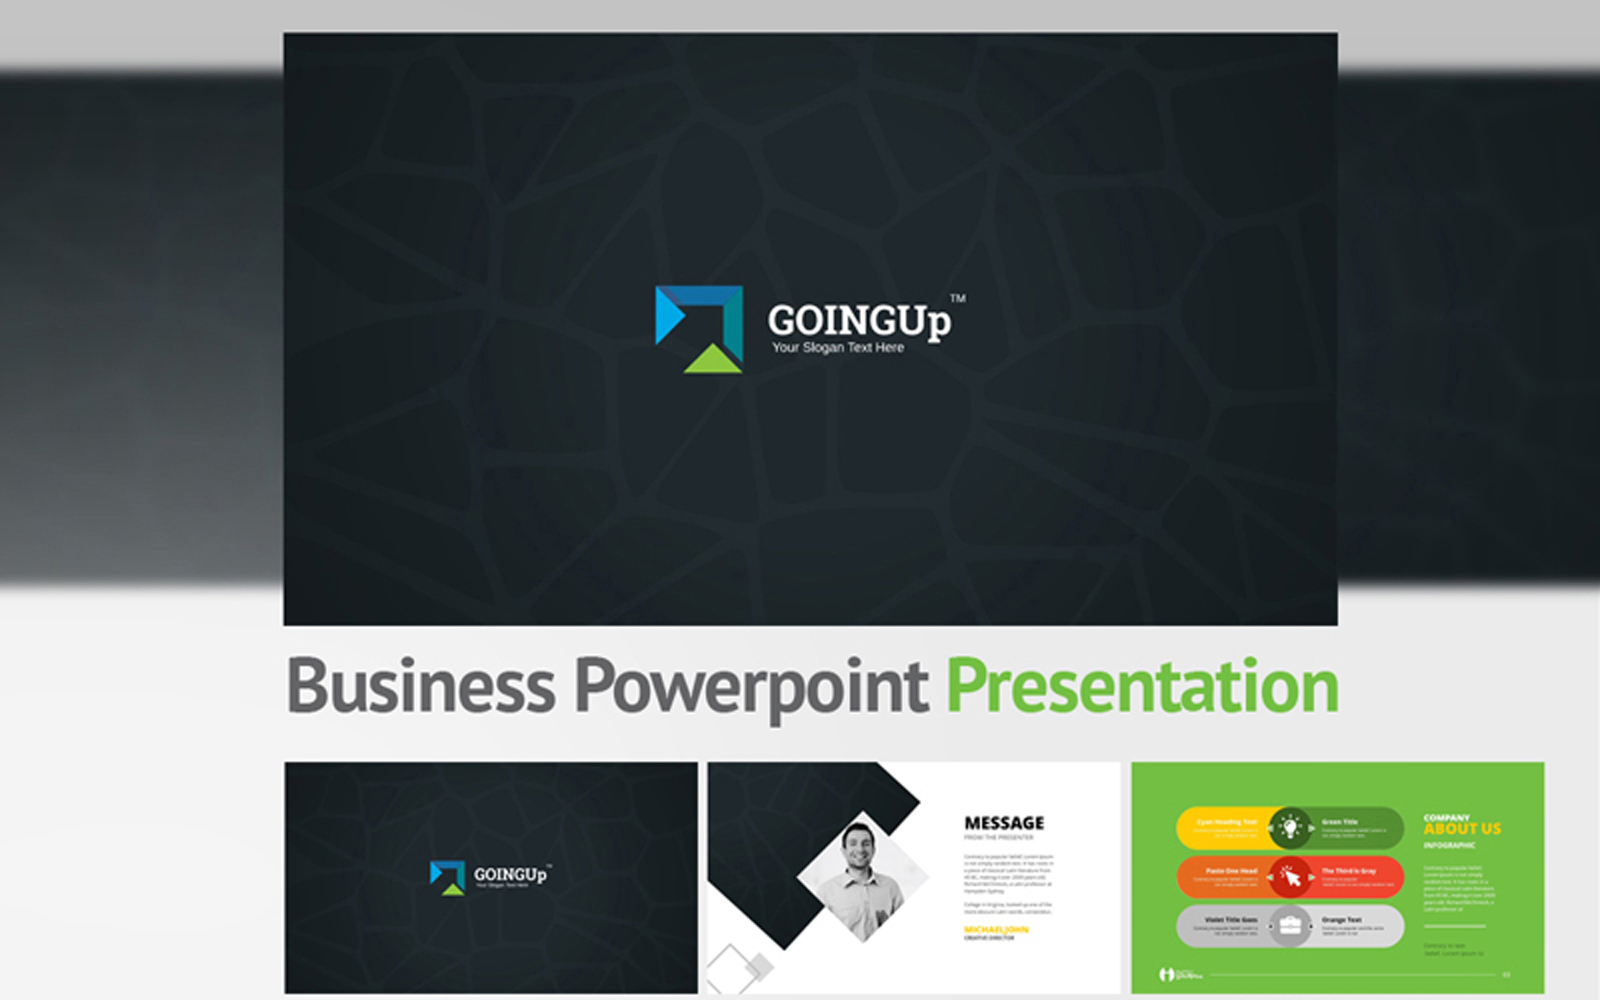 Goingup PowerPoint template